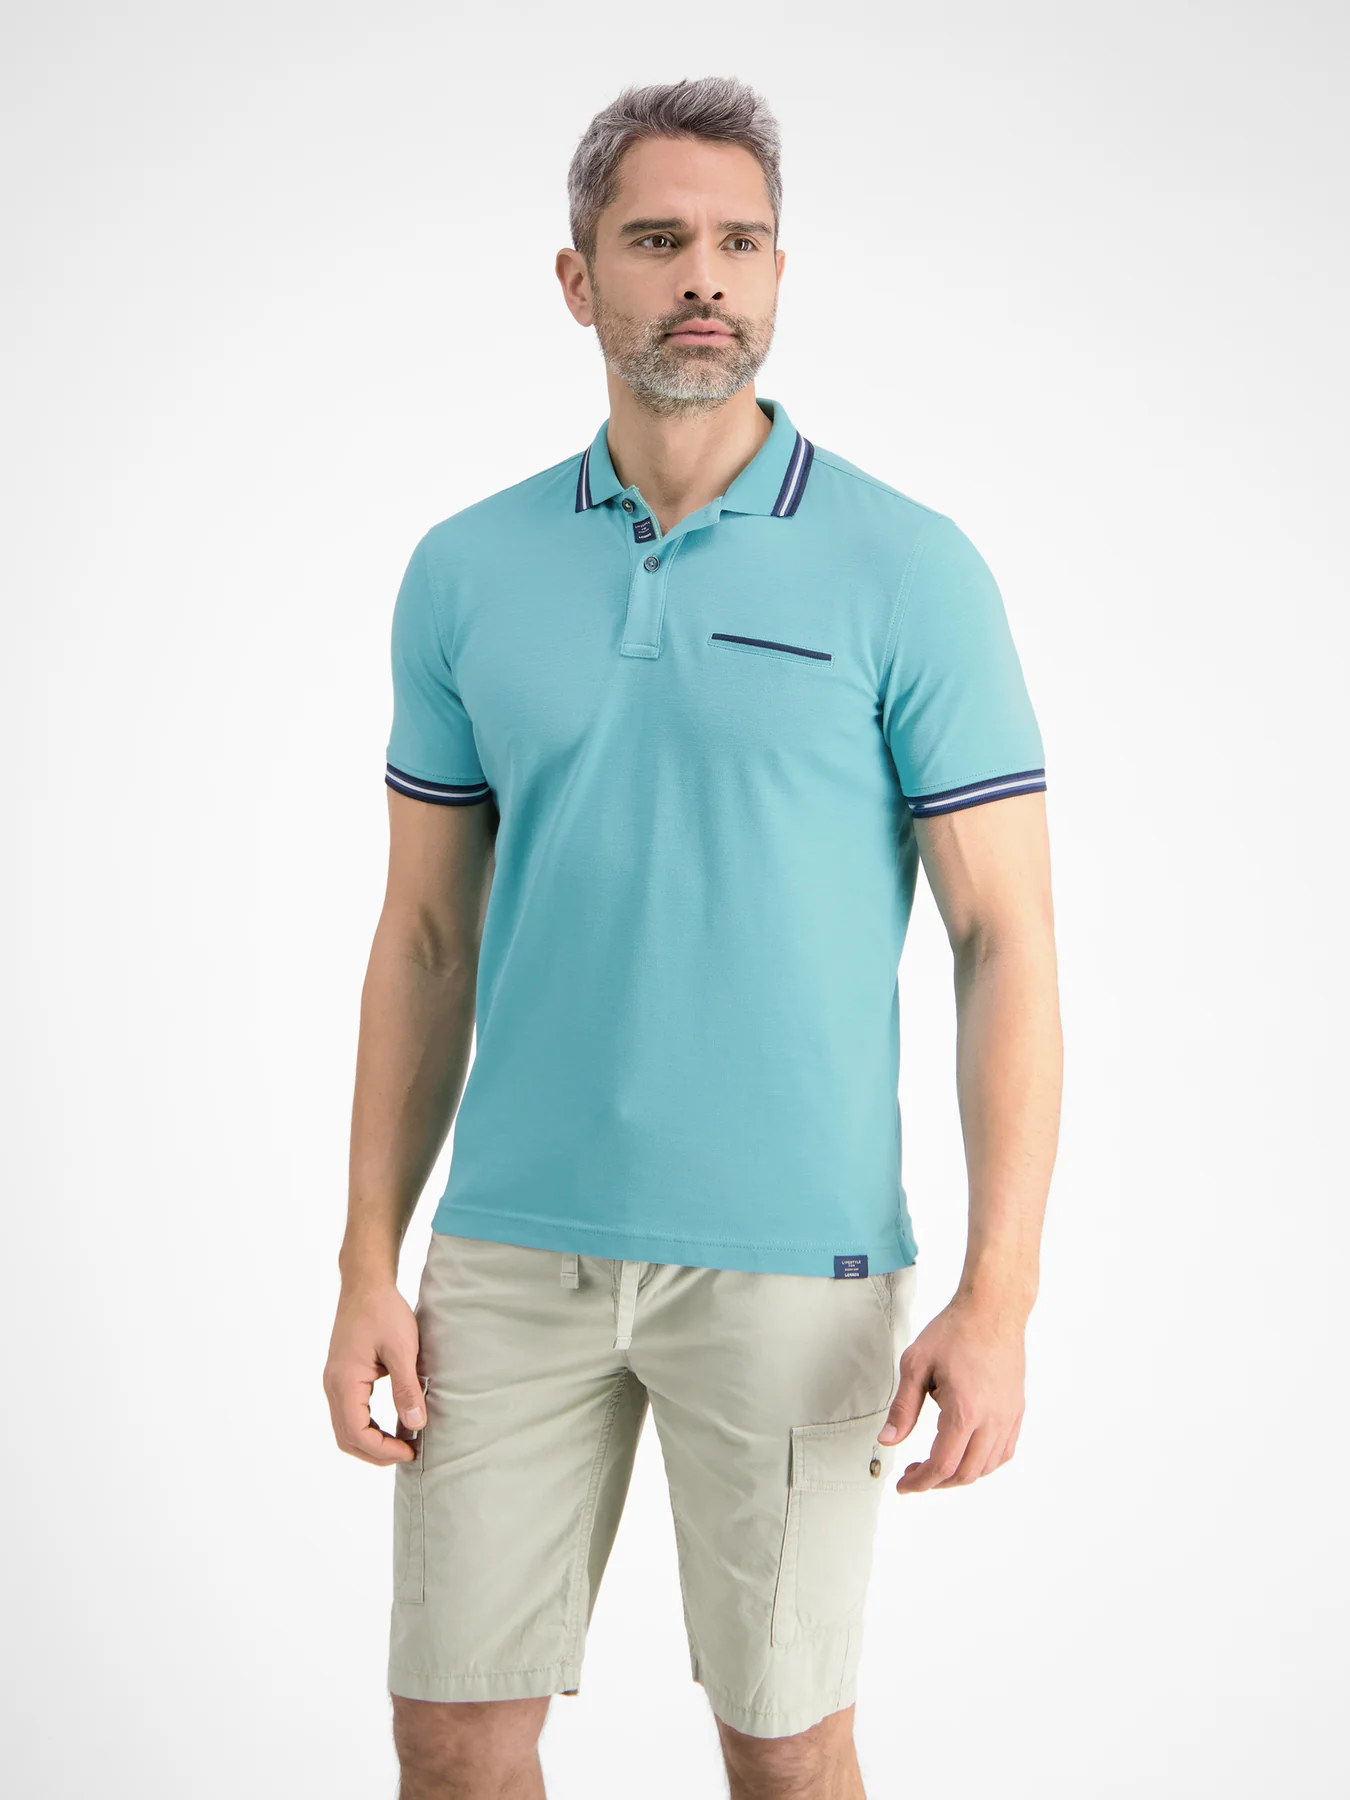 Turquoise Poloshirt - Structure LERROS Cotton Light with - Blues |